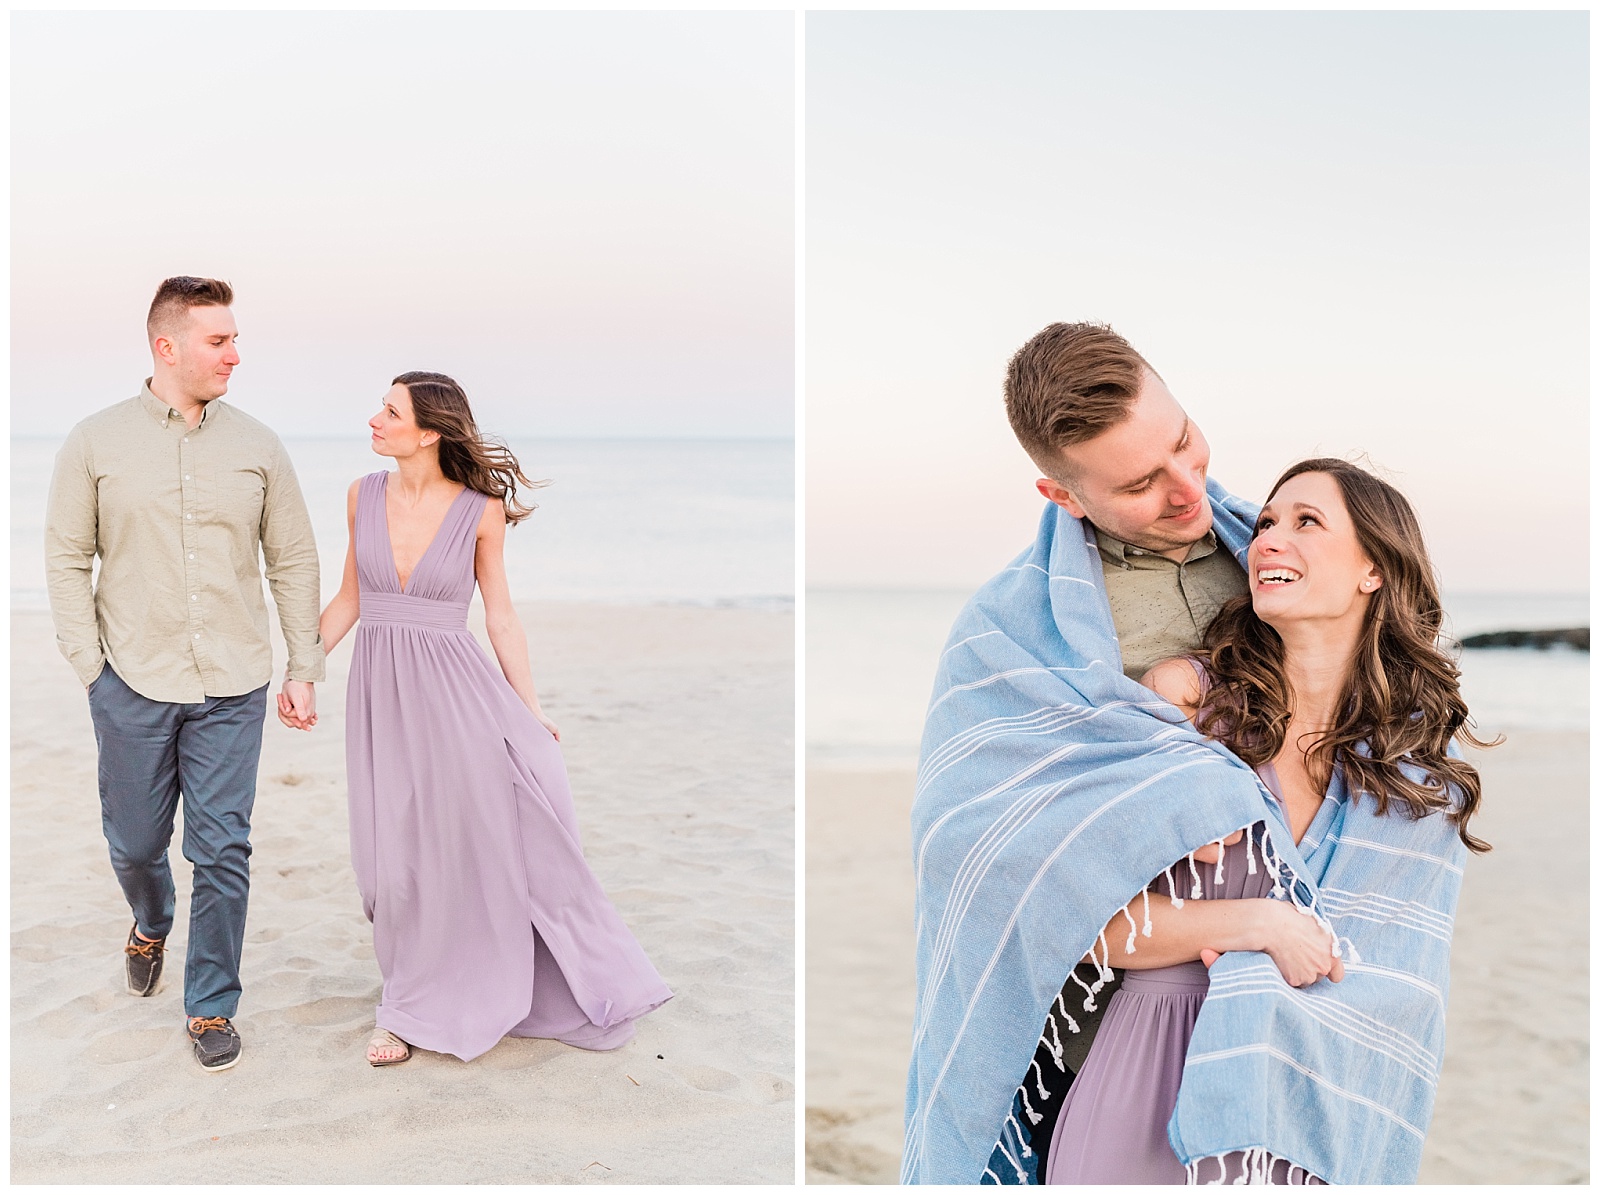 New Jersey, Engagement Session, Asbury Park, NJ, Wedding Photographer, Springtime, Light and Airy, Golden Hour, Beach